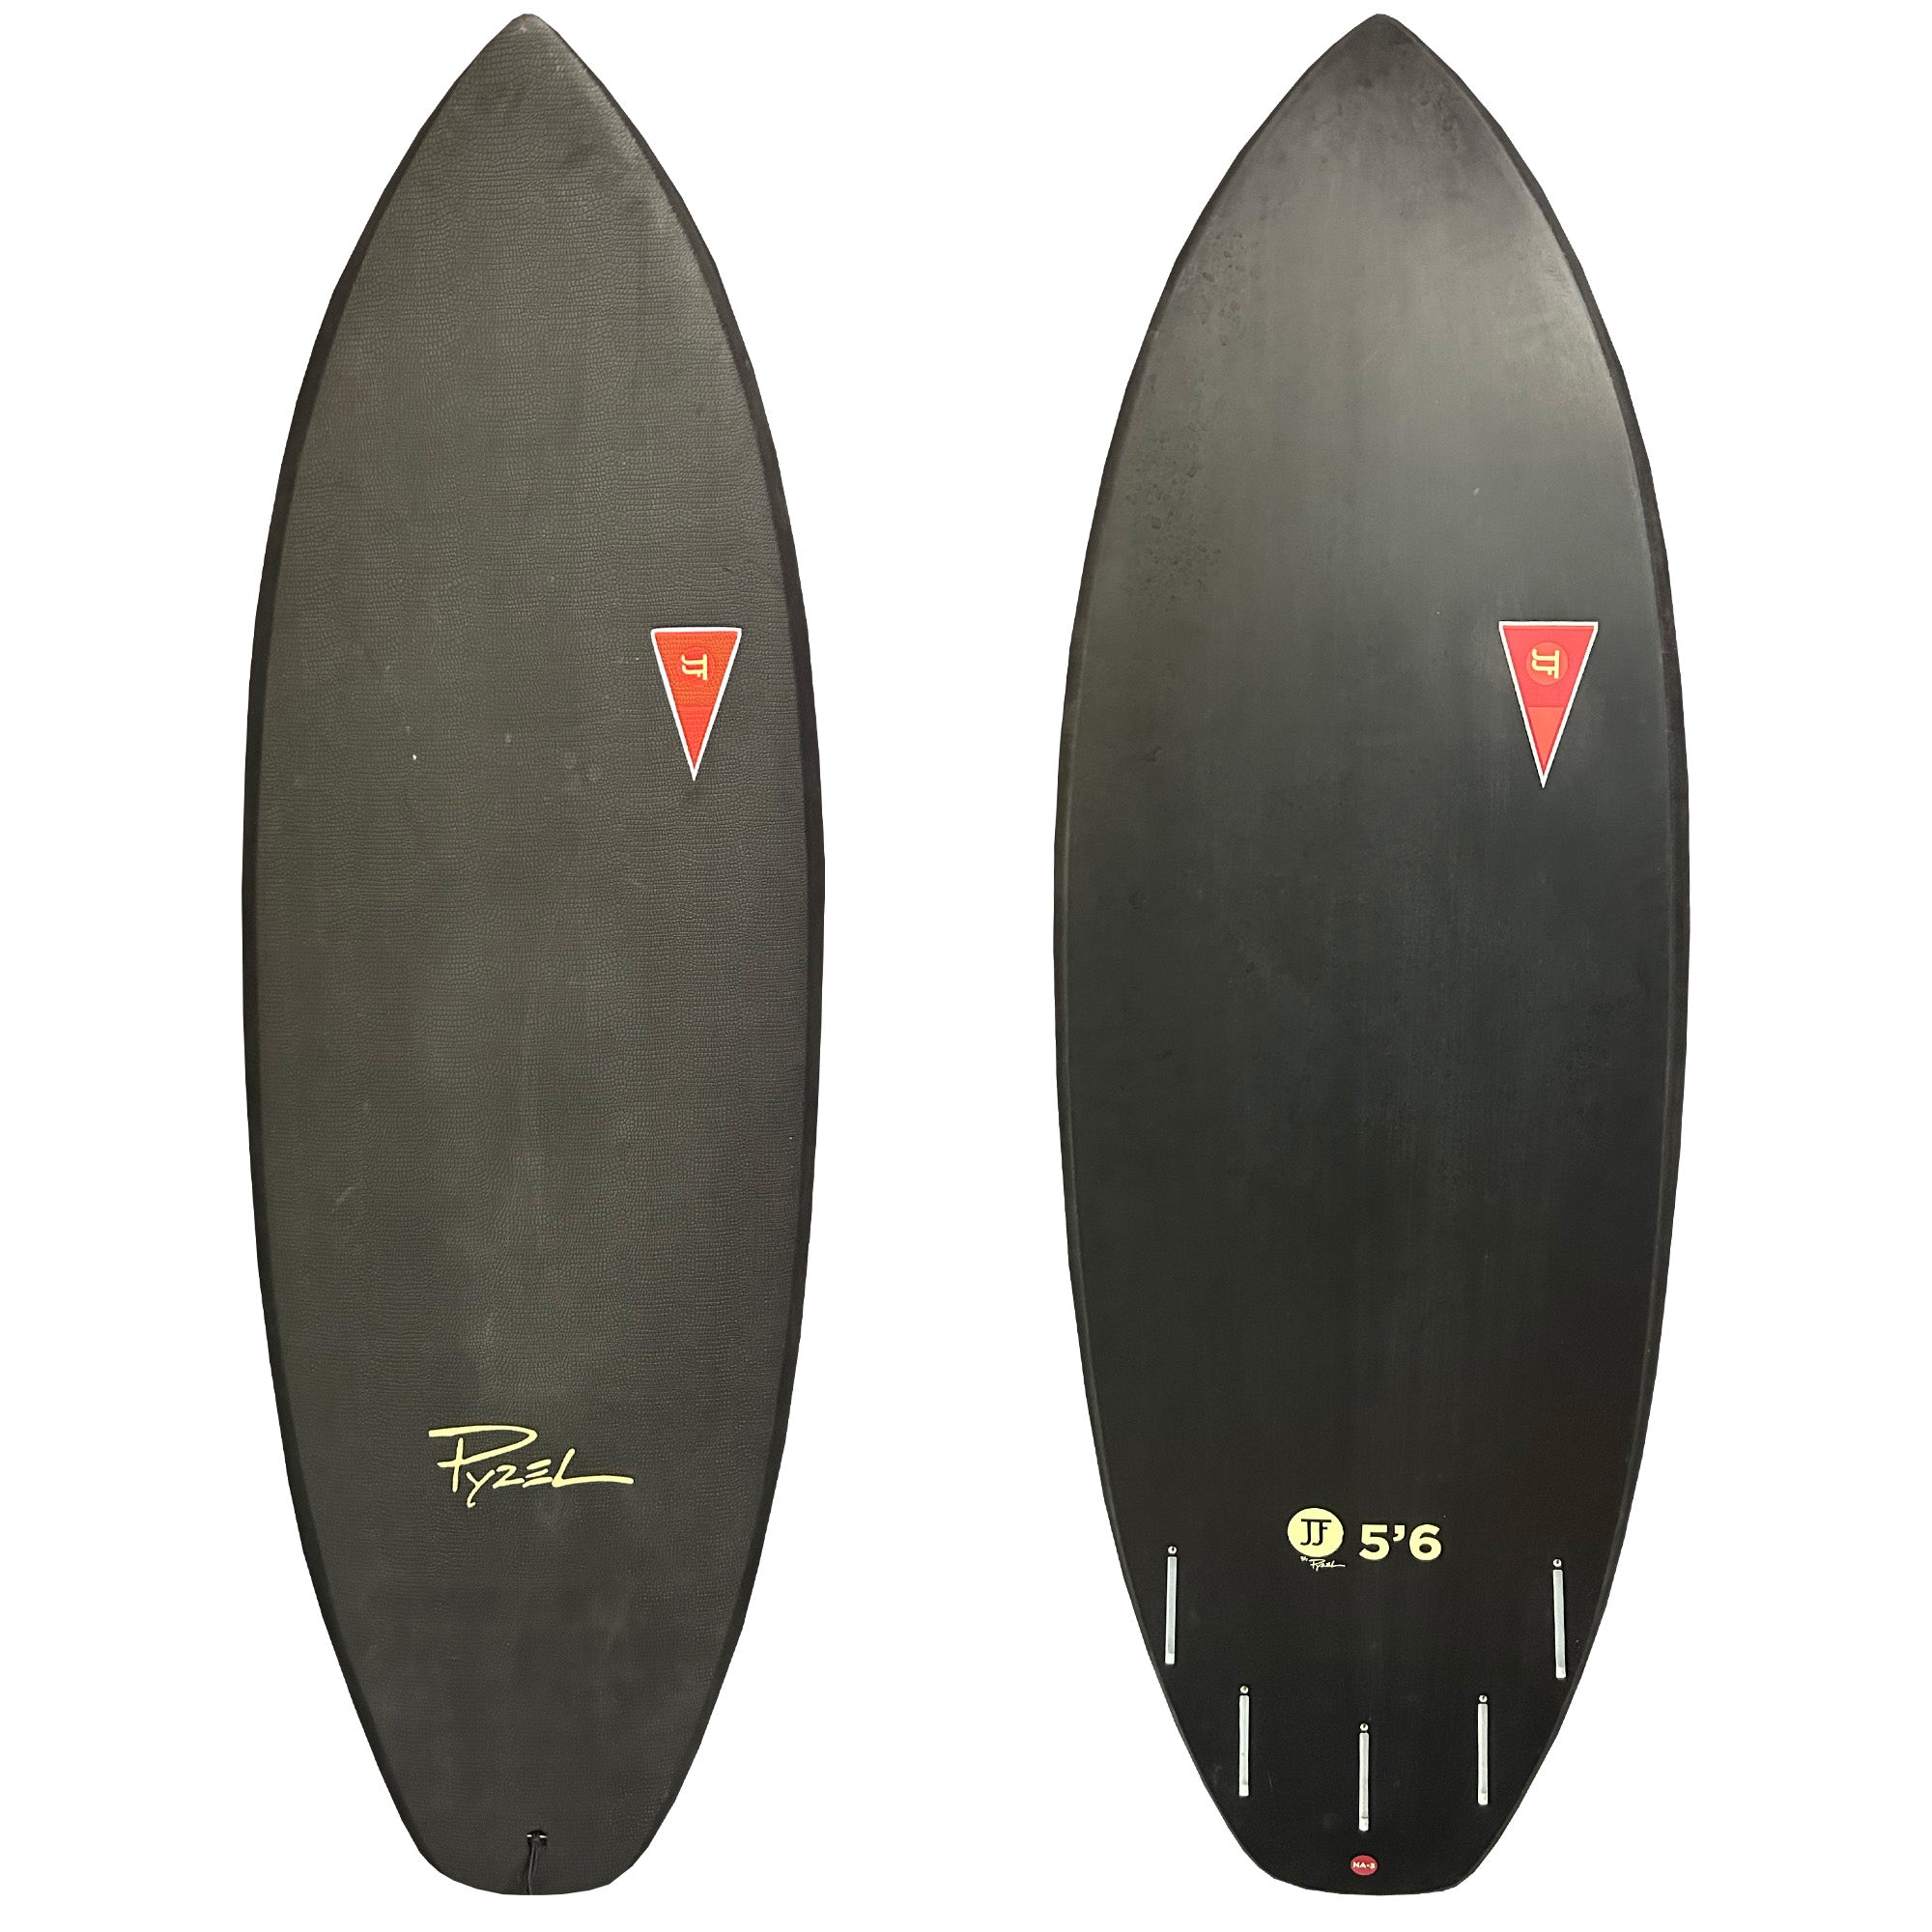 Pyzel JJF Soft Top 5'6 Consignment Surfboard